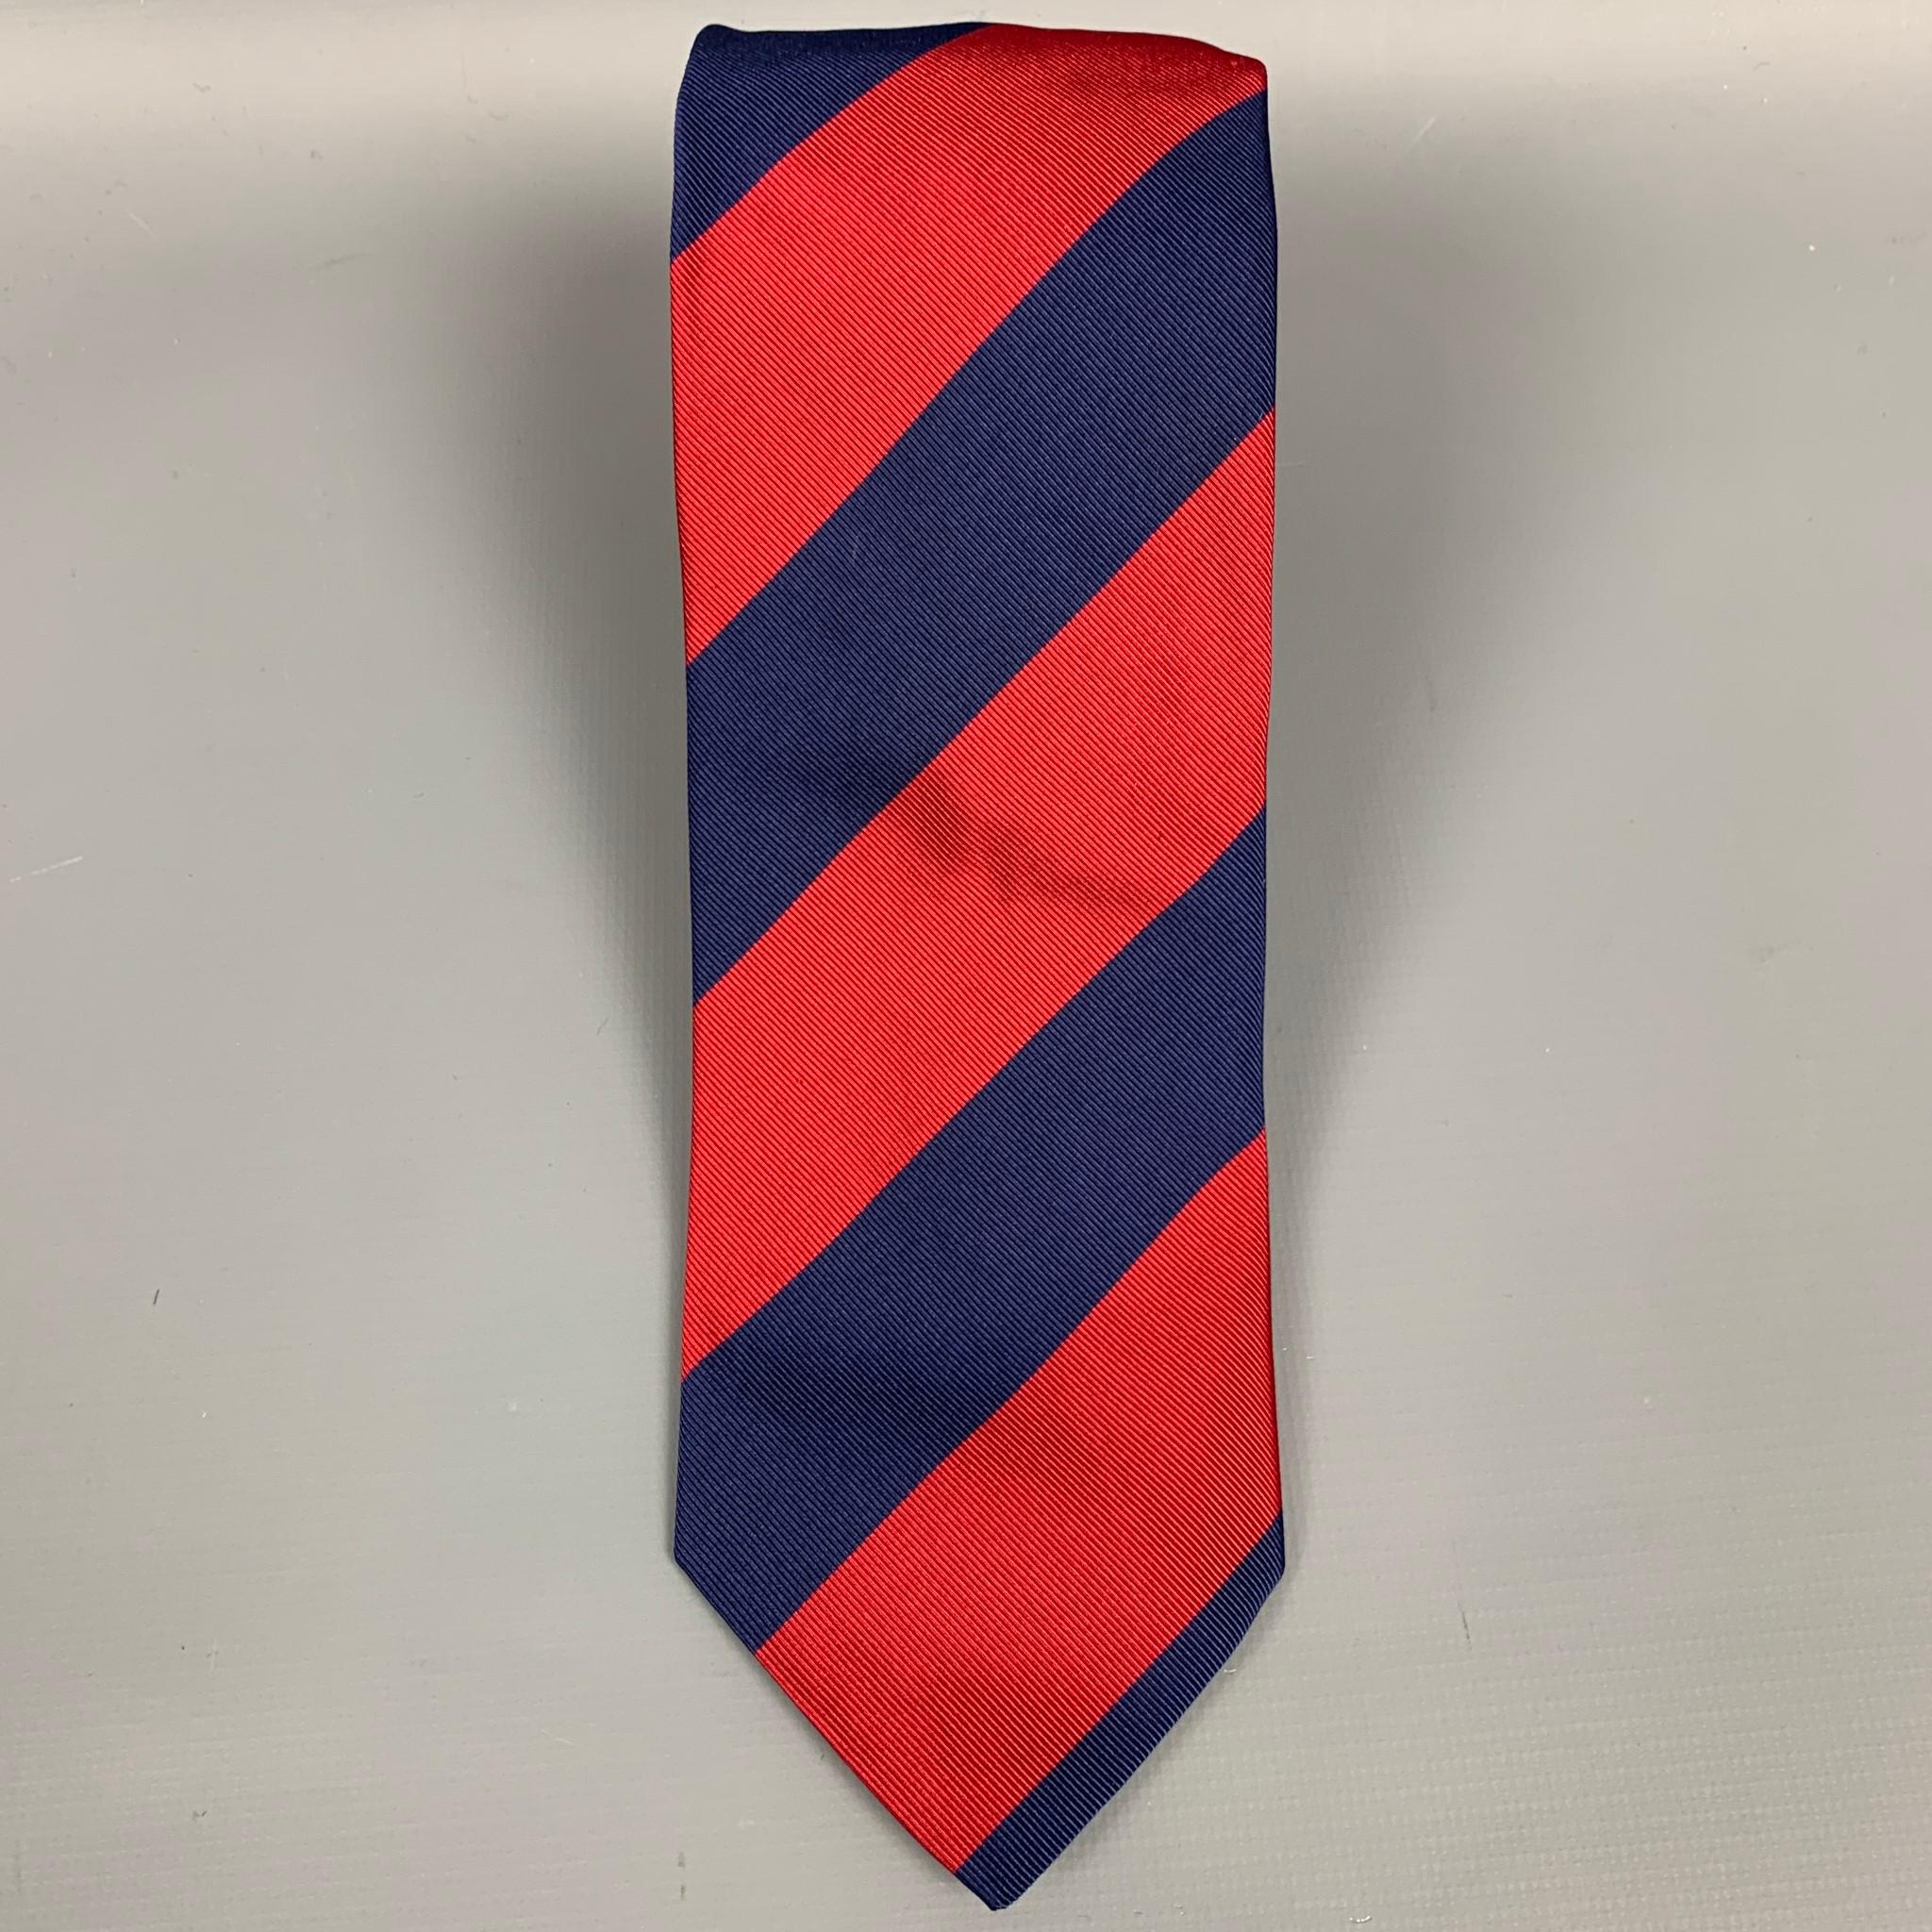 LUCIANO BARBERA neck tie comes in navy & red stripe silk / cotton. Made in Italy.

Very Good Pre-Owned Condition.

Measurements:

Width: 3 in. 